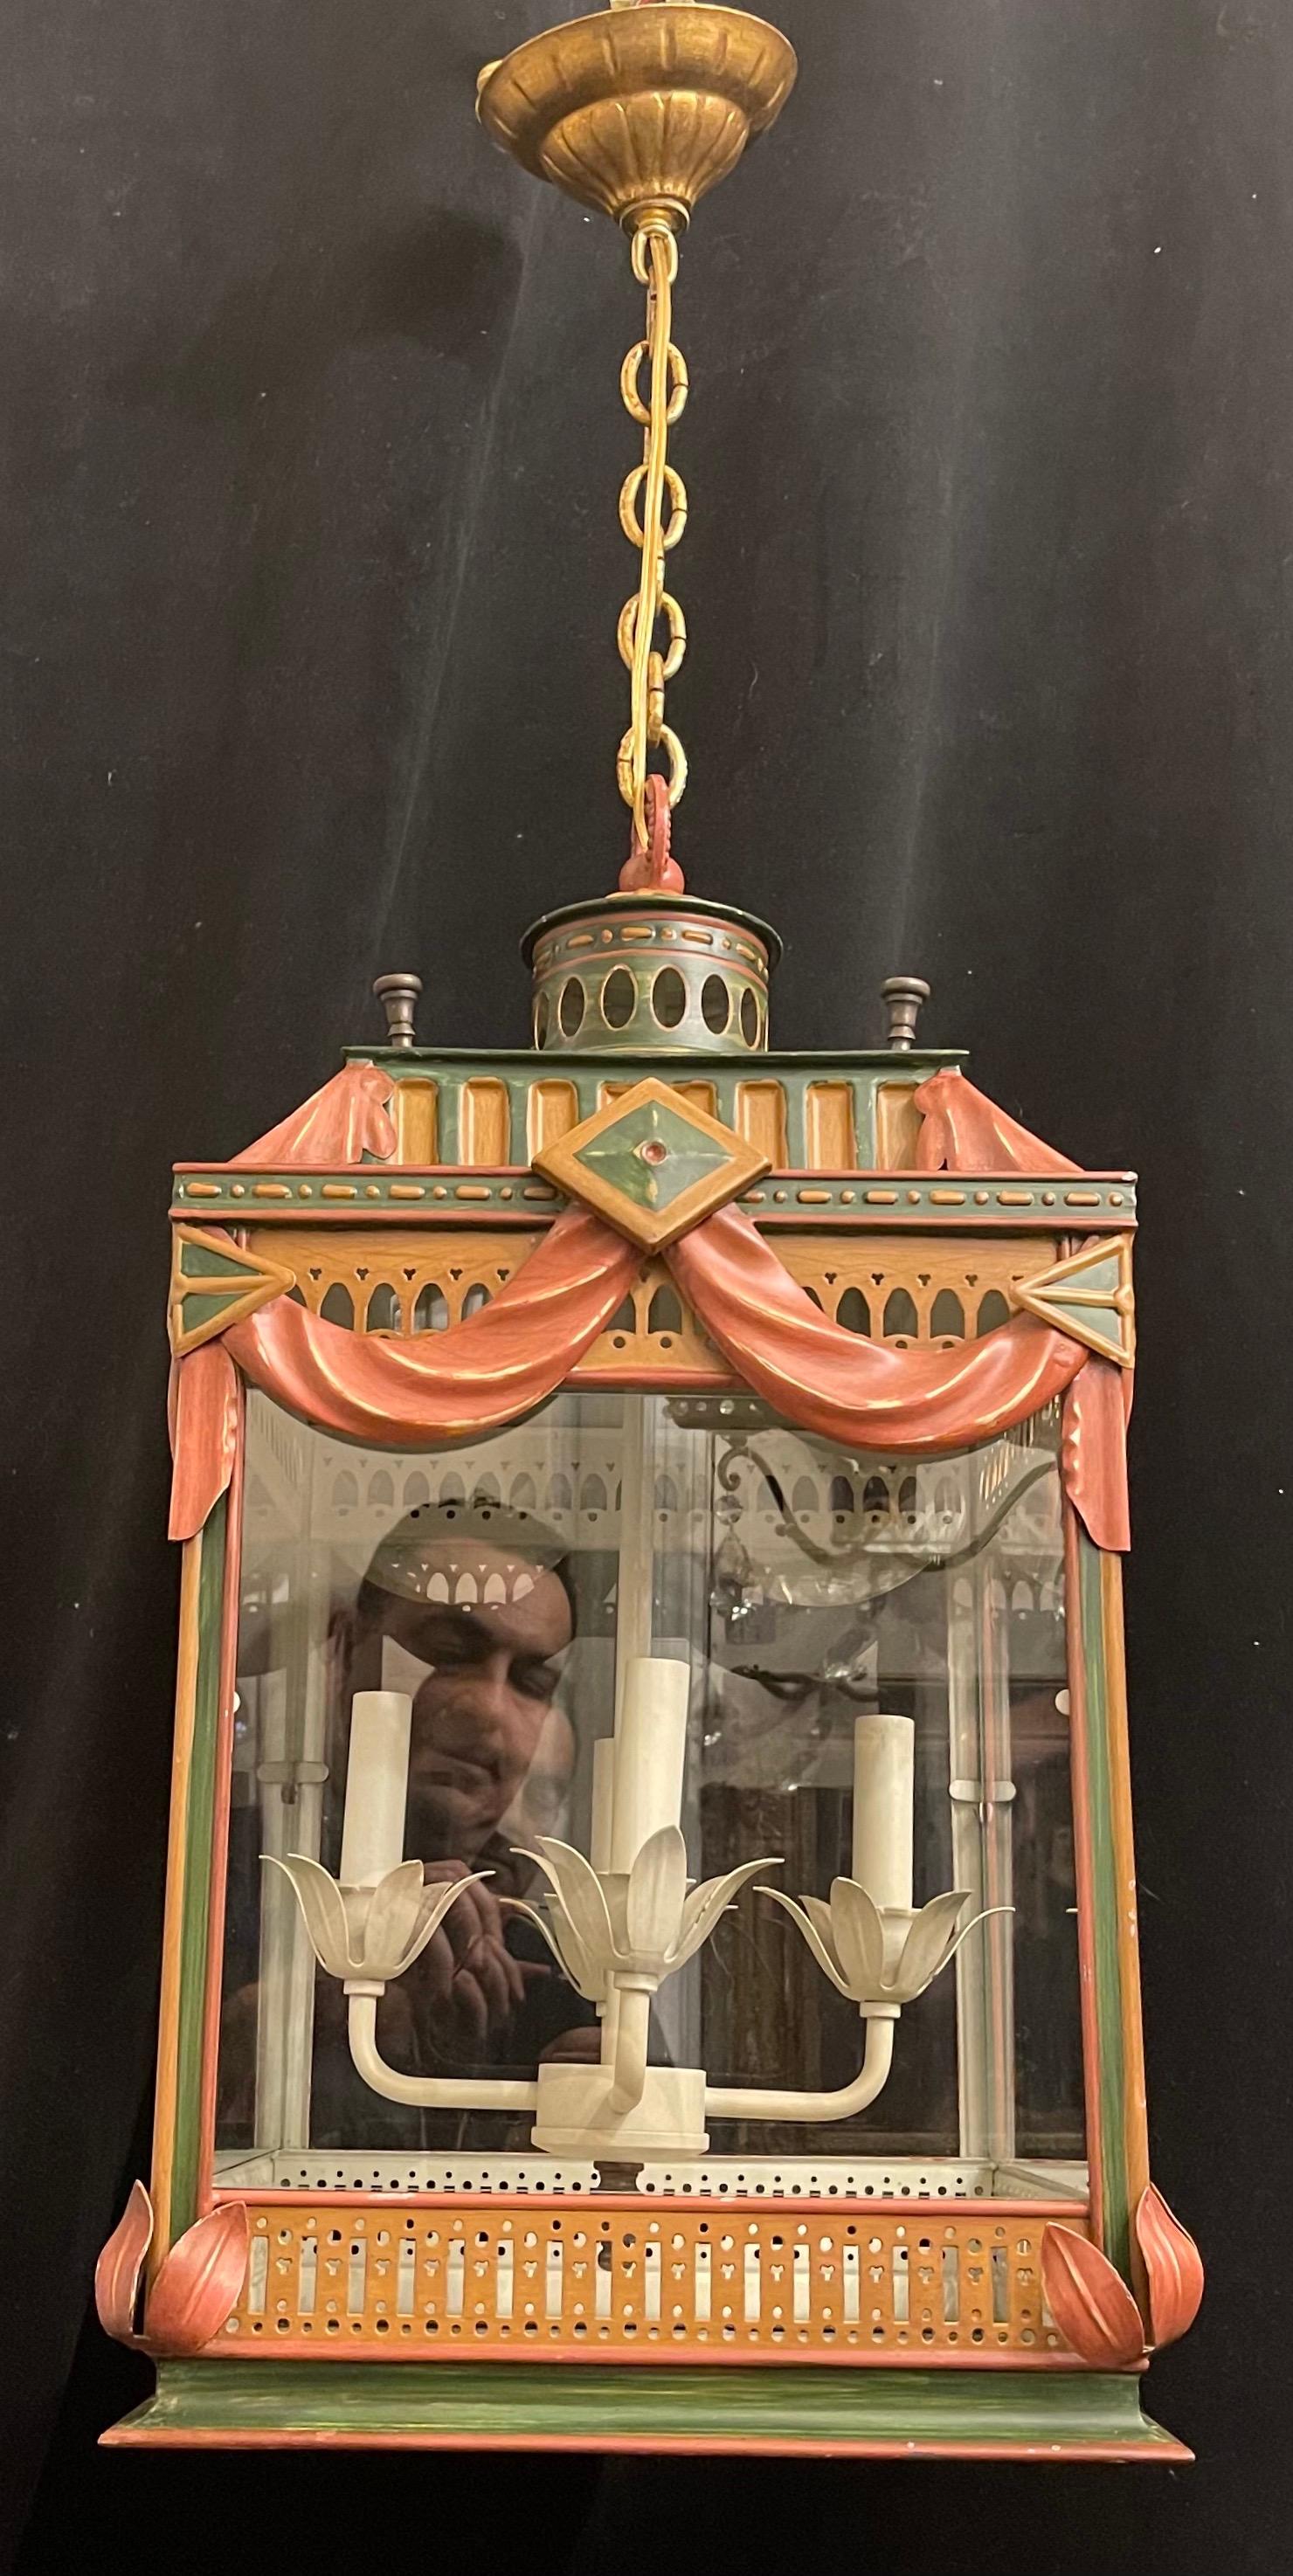 A wonderful hand painted Italian tole pagoda square glass panel chinoiserie 4 candelabra light lantern fixture rewired and ready to install with chain canopy and mounting hardware.